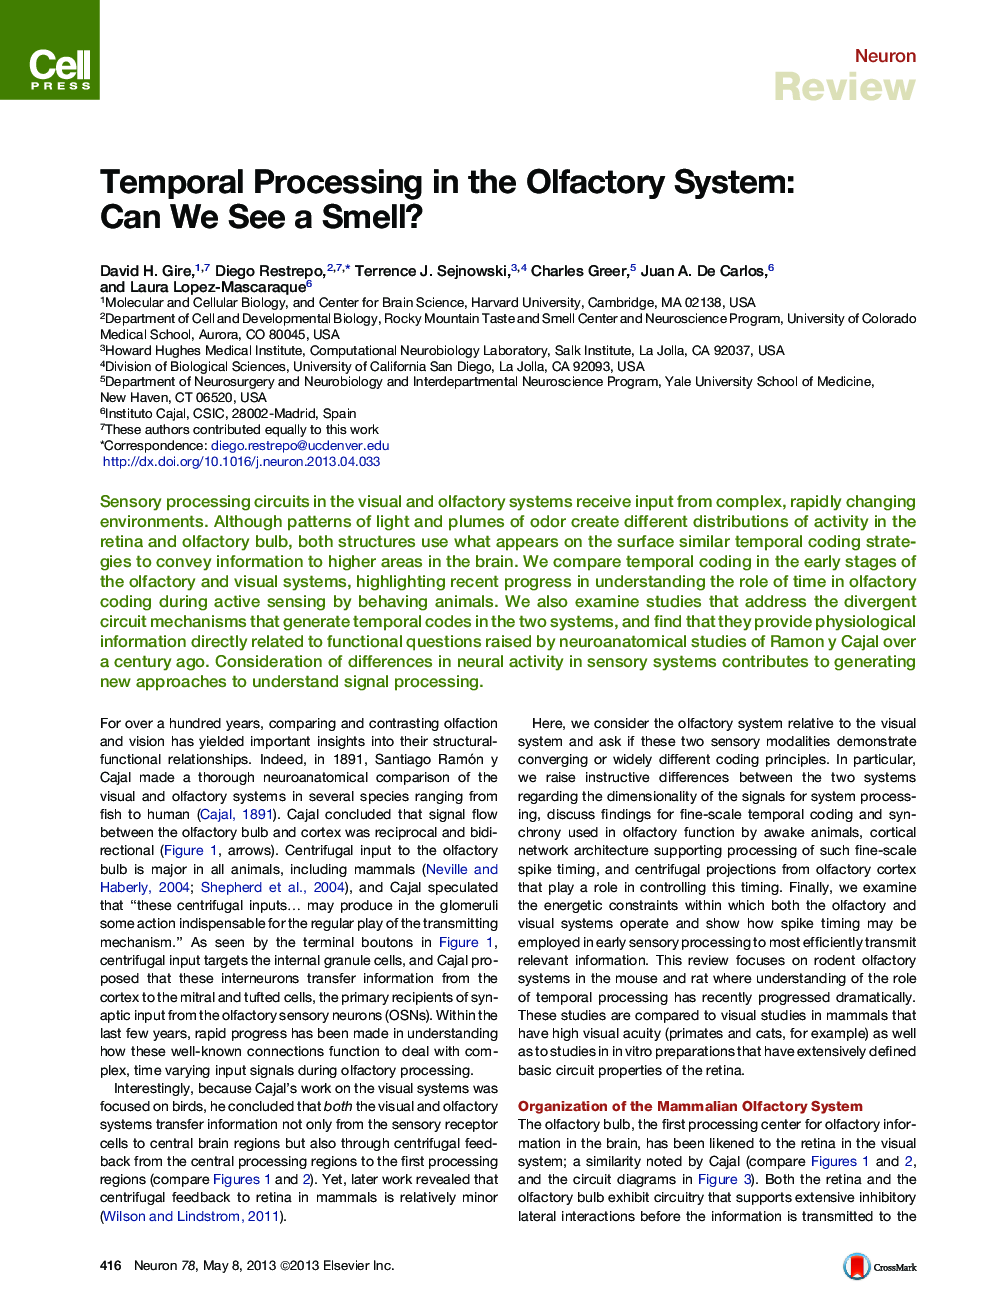 Temporal Processing in the Olfactory System: Can We See a Smell?